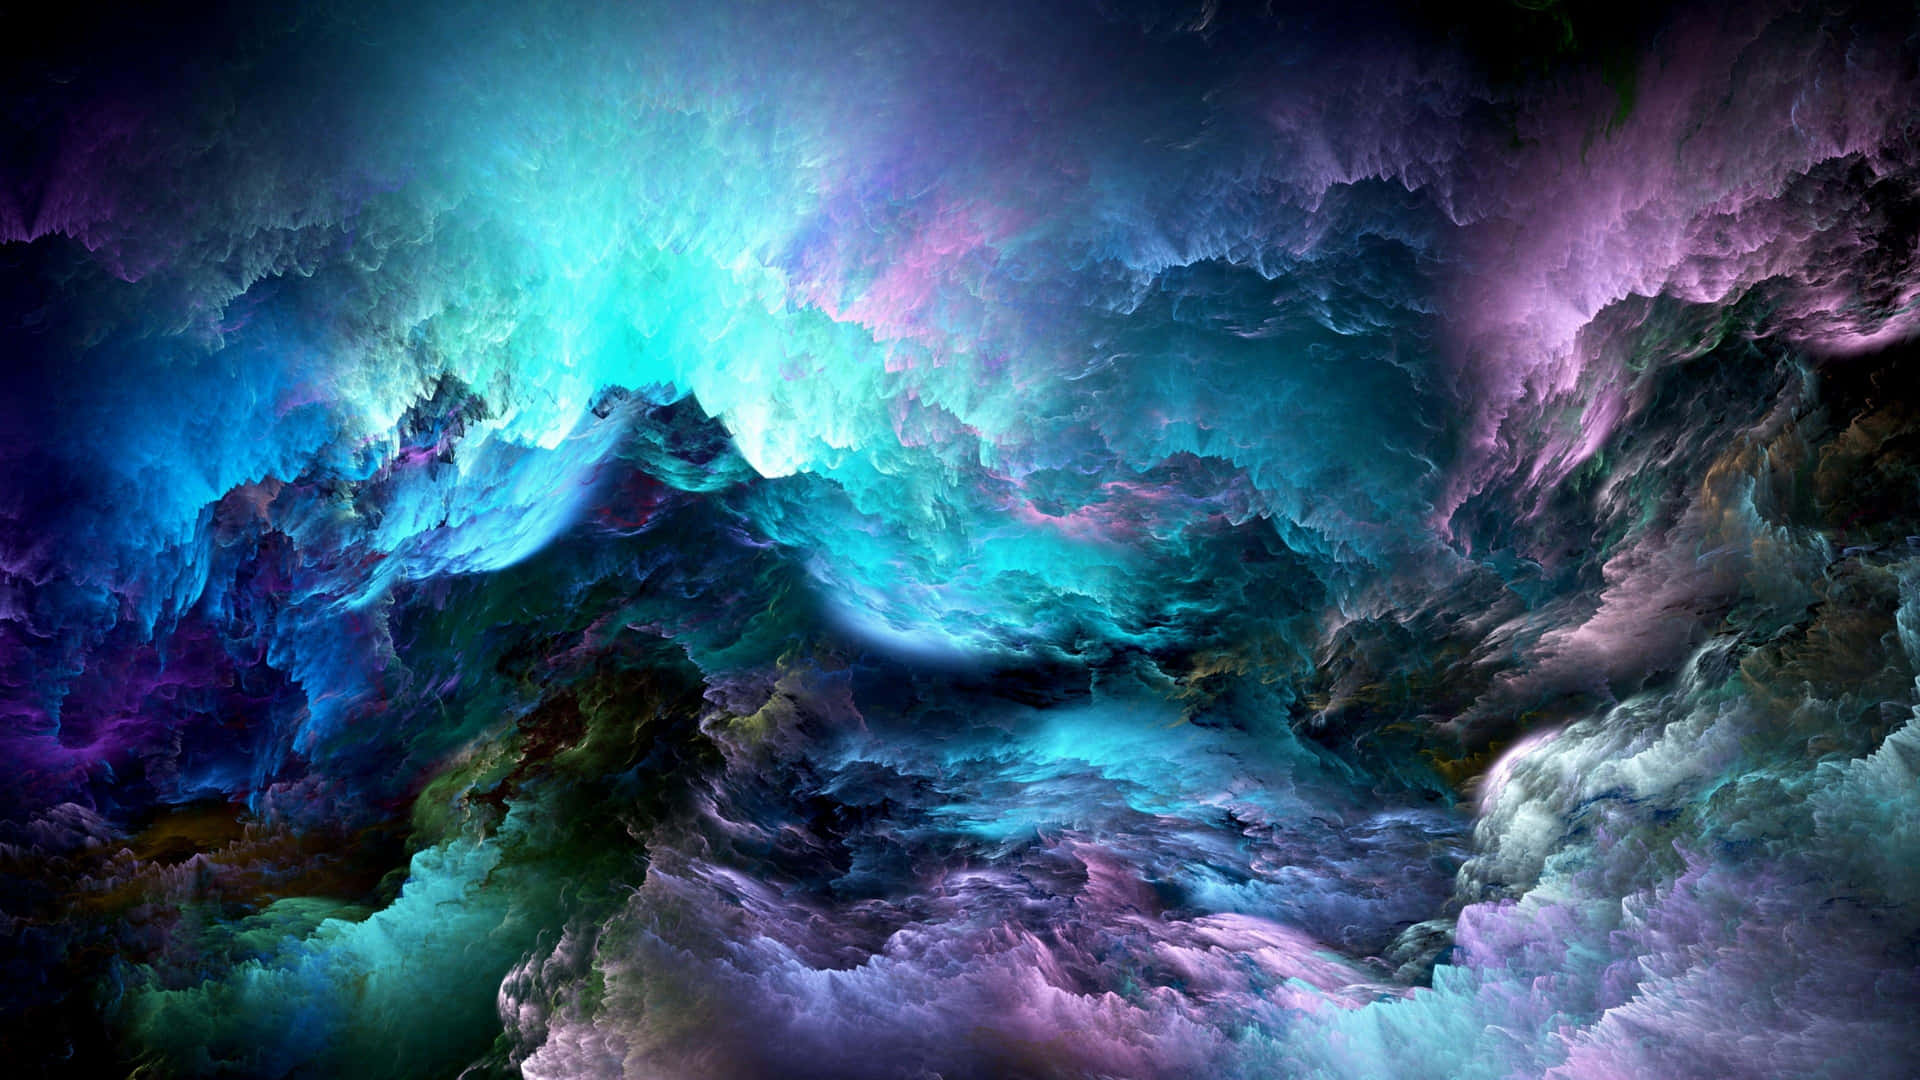 The power and majesty of the sea is on full display here in this 4K image Wallpaper